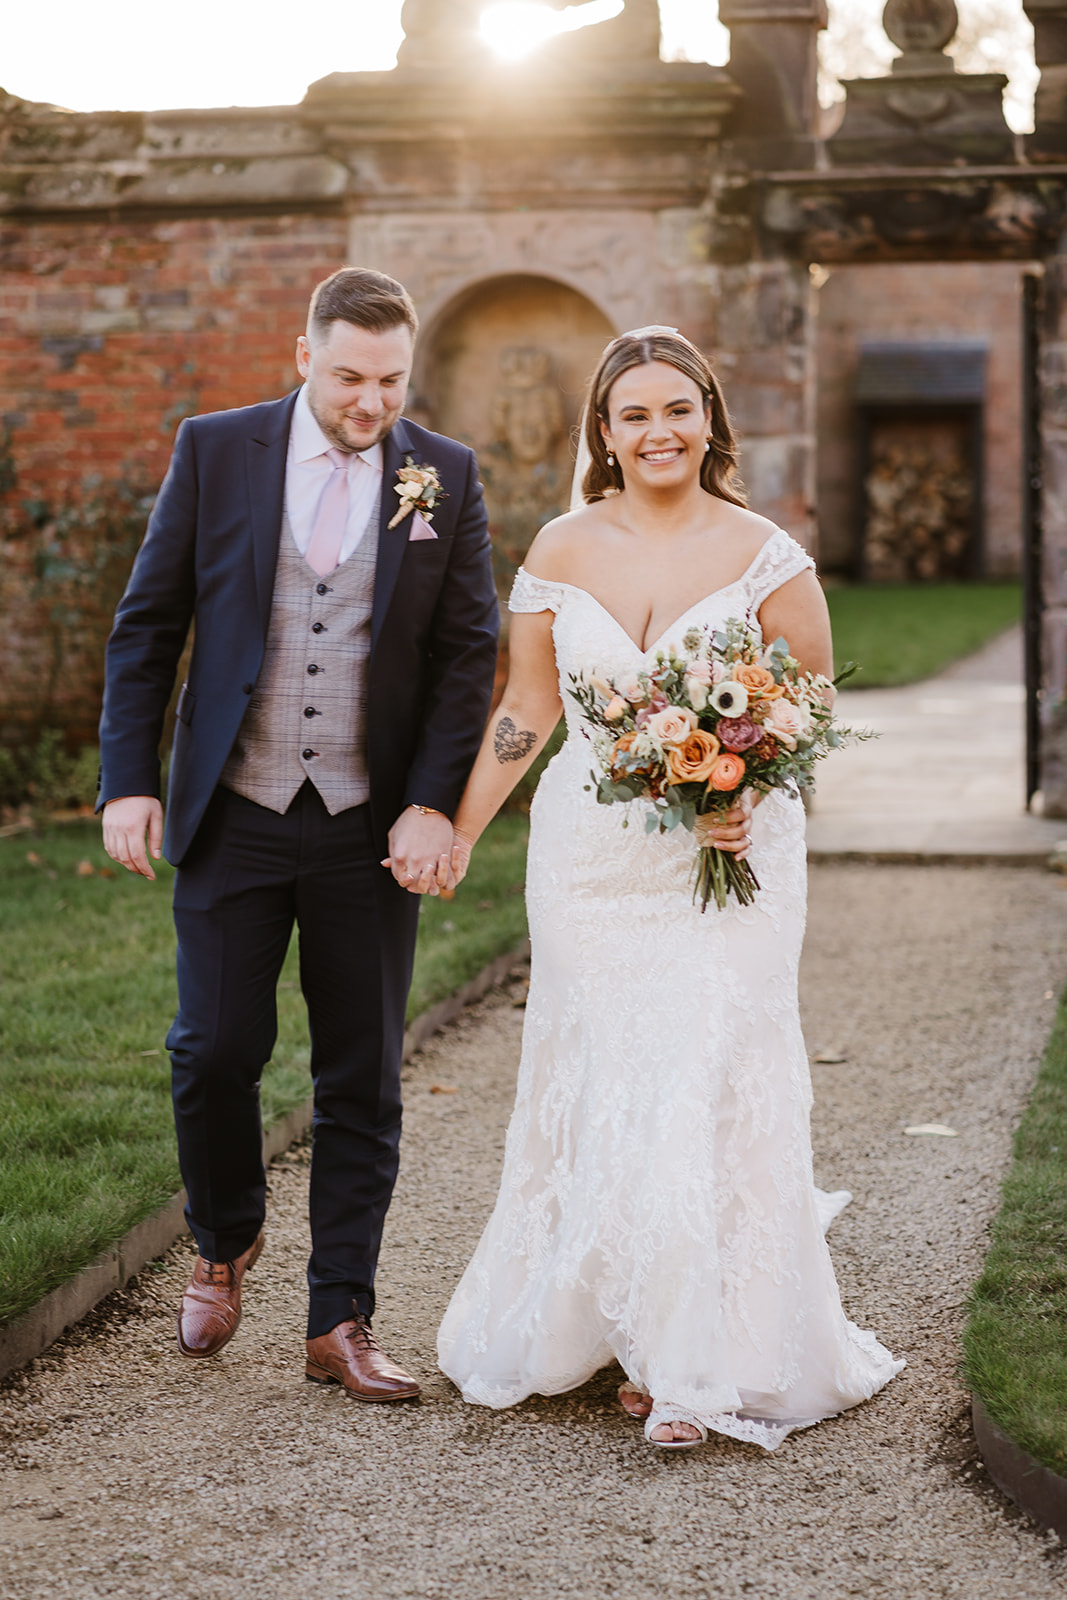 Bride and groom walk through stately home gardens in evening light